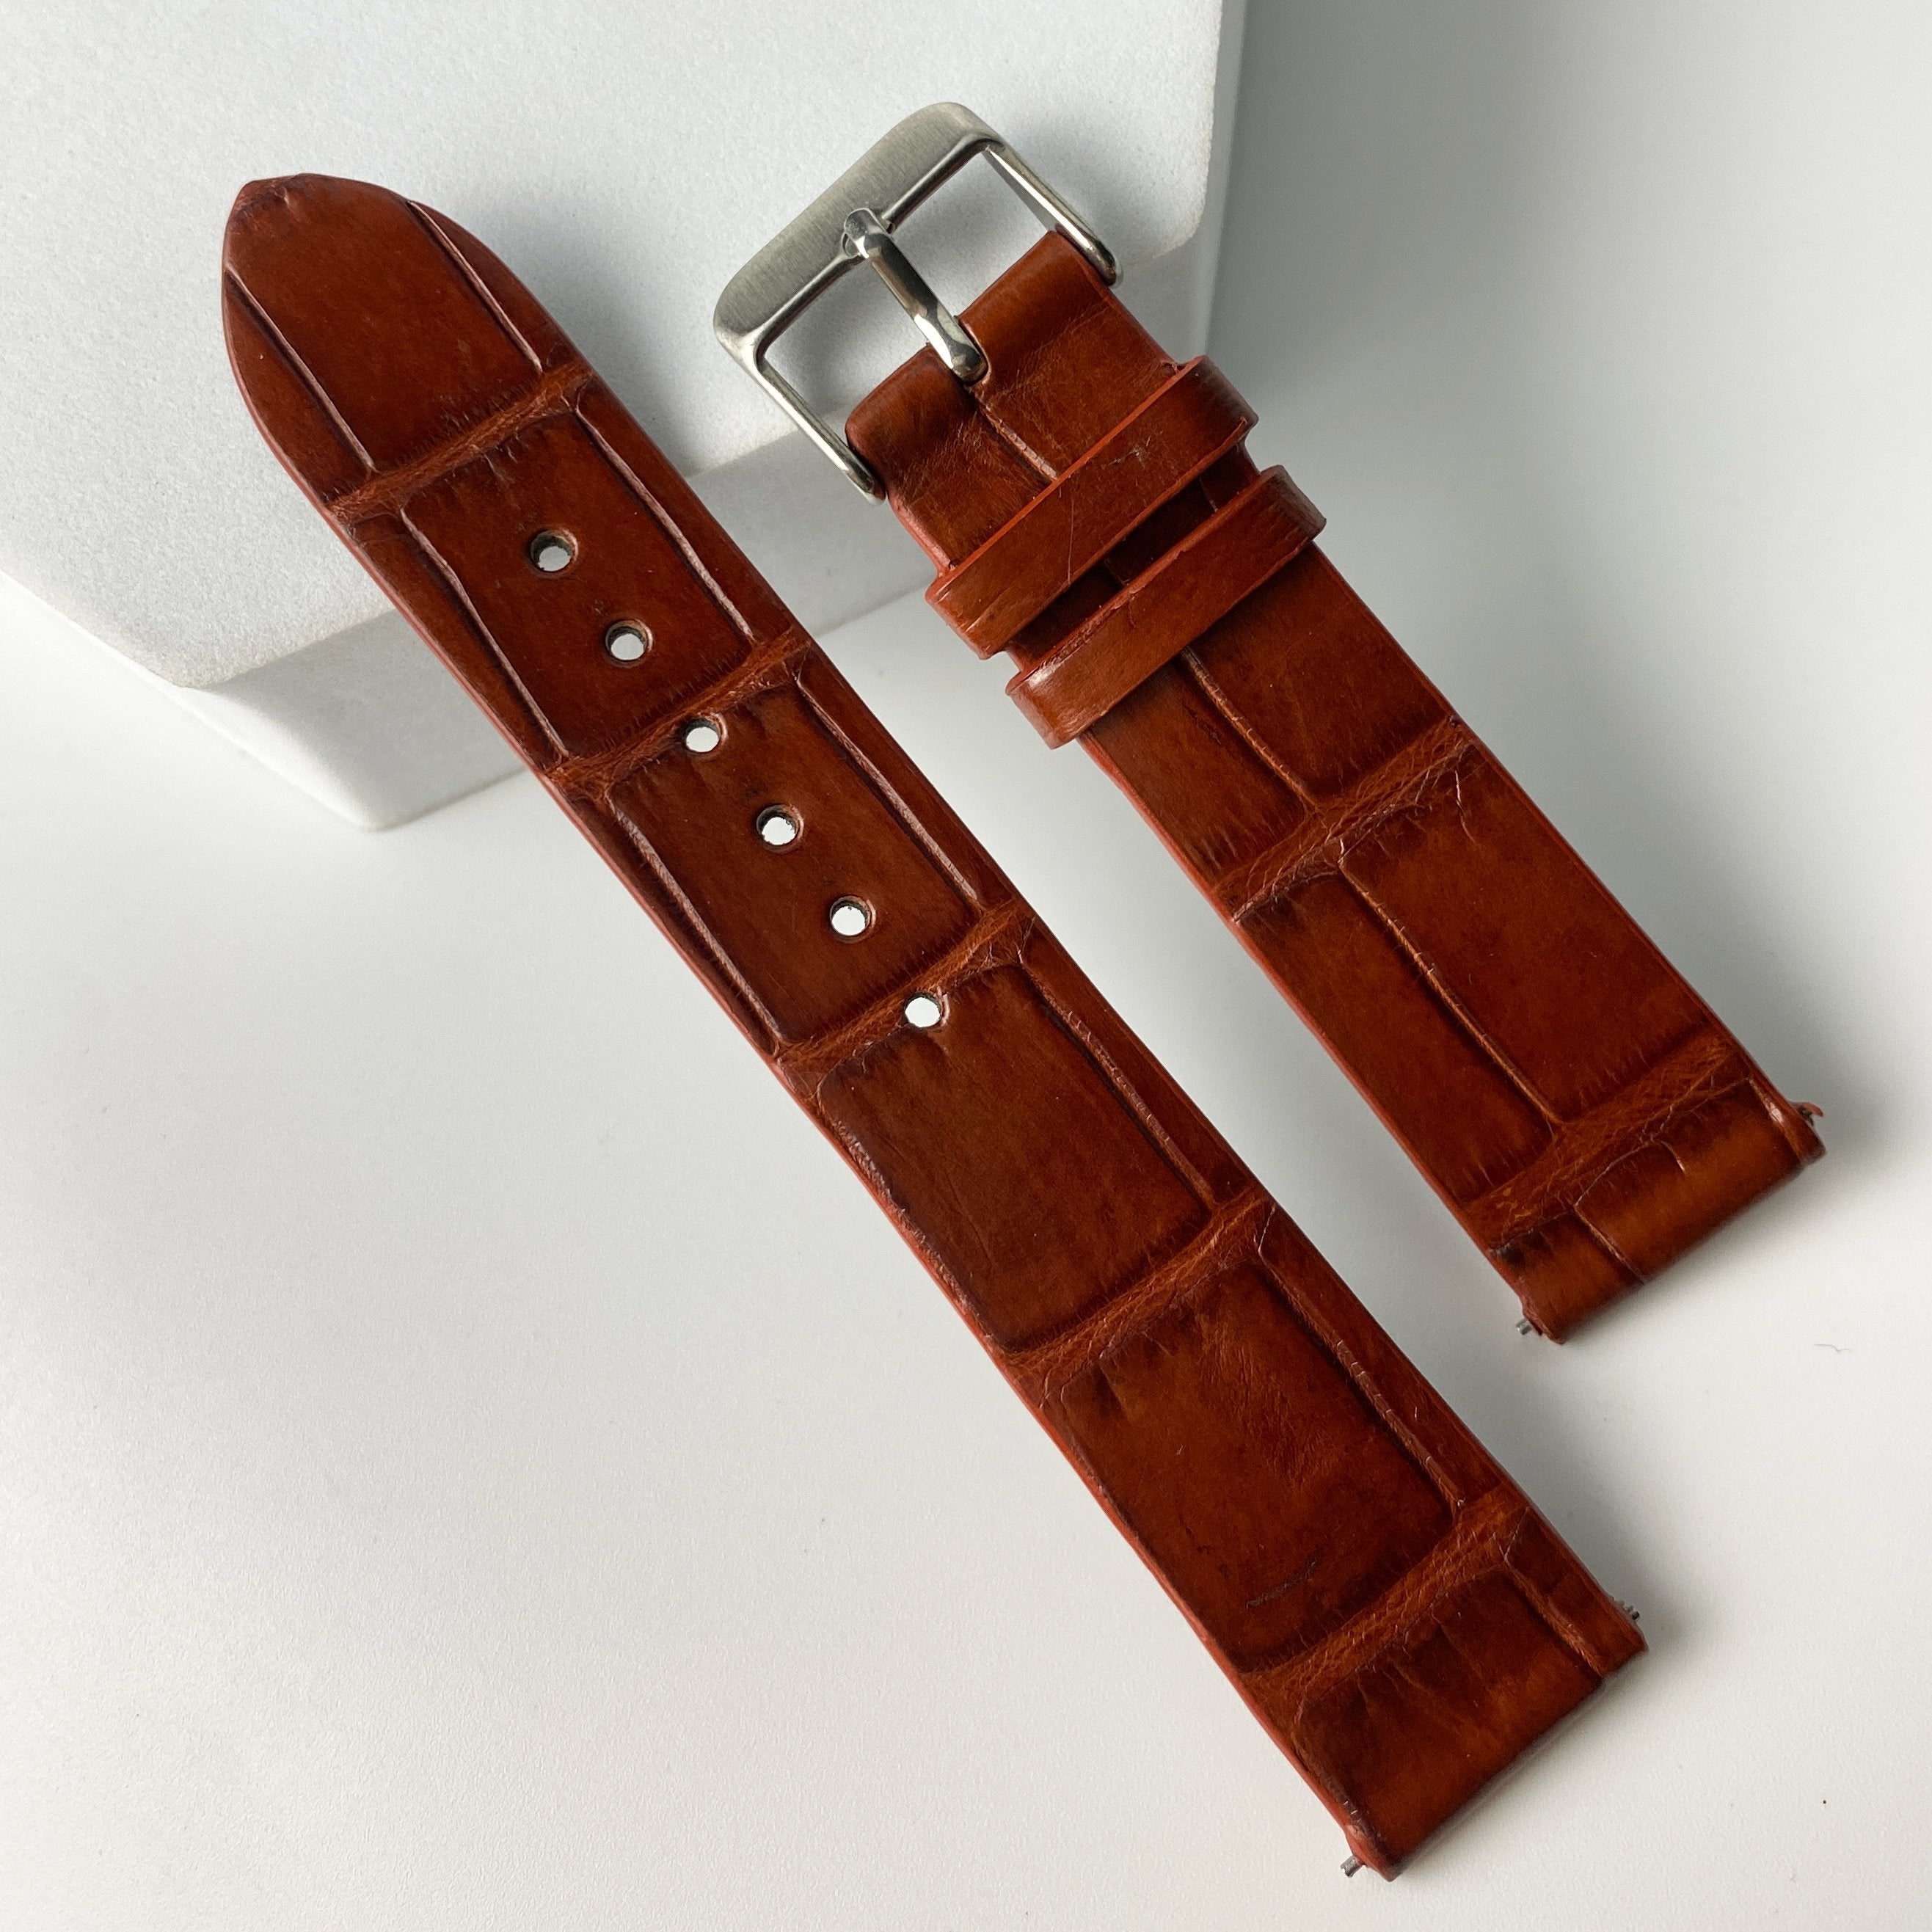 Light Brown Alligator Leather Watch Band For Men DH-13 - Vinacreations